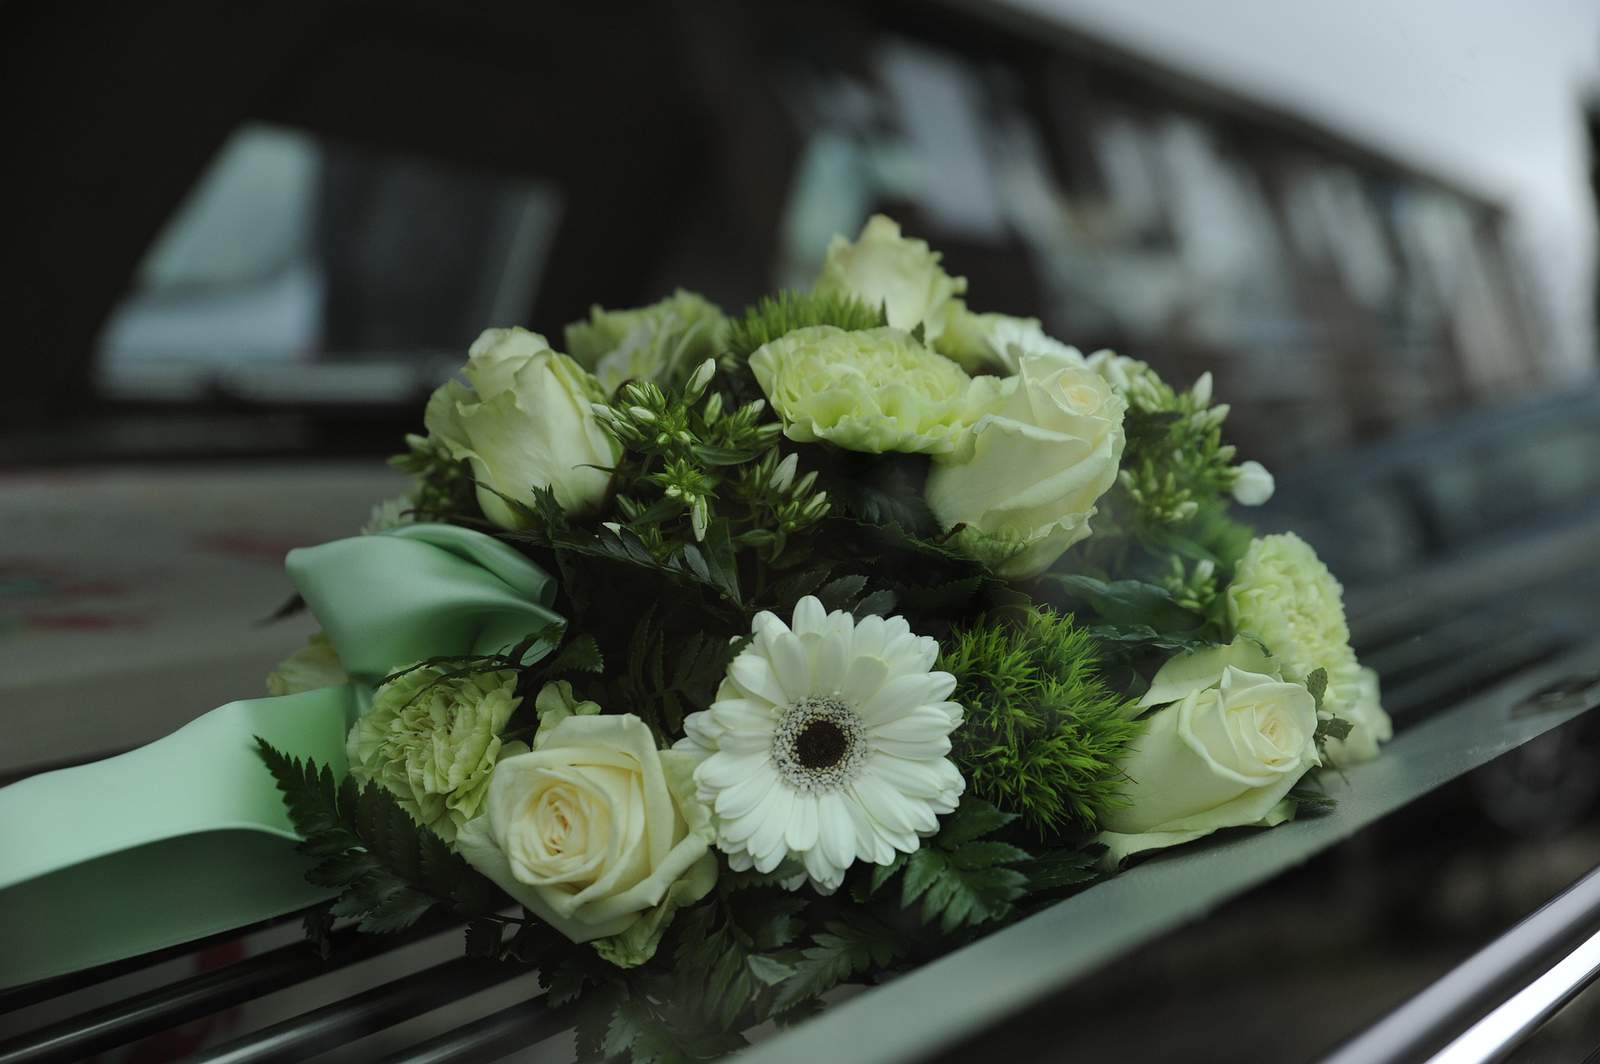 Michigan Funeral Directors Encouraged To Make Changes During